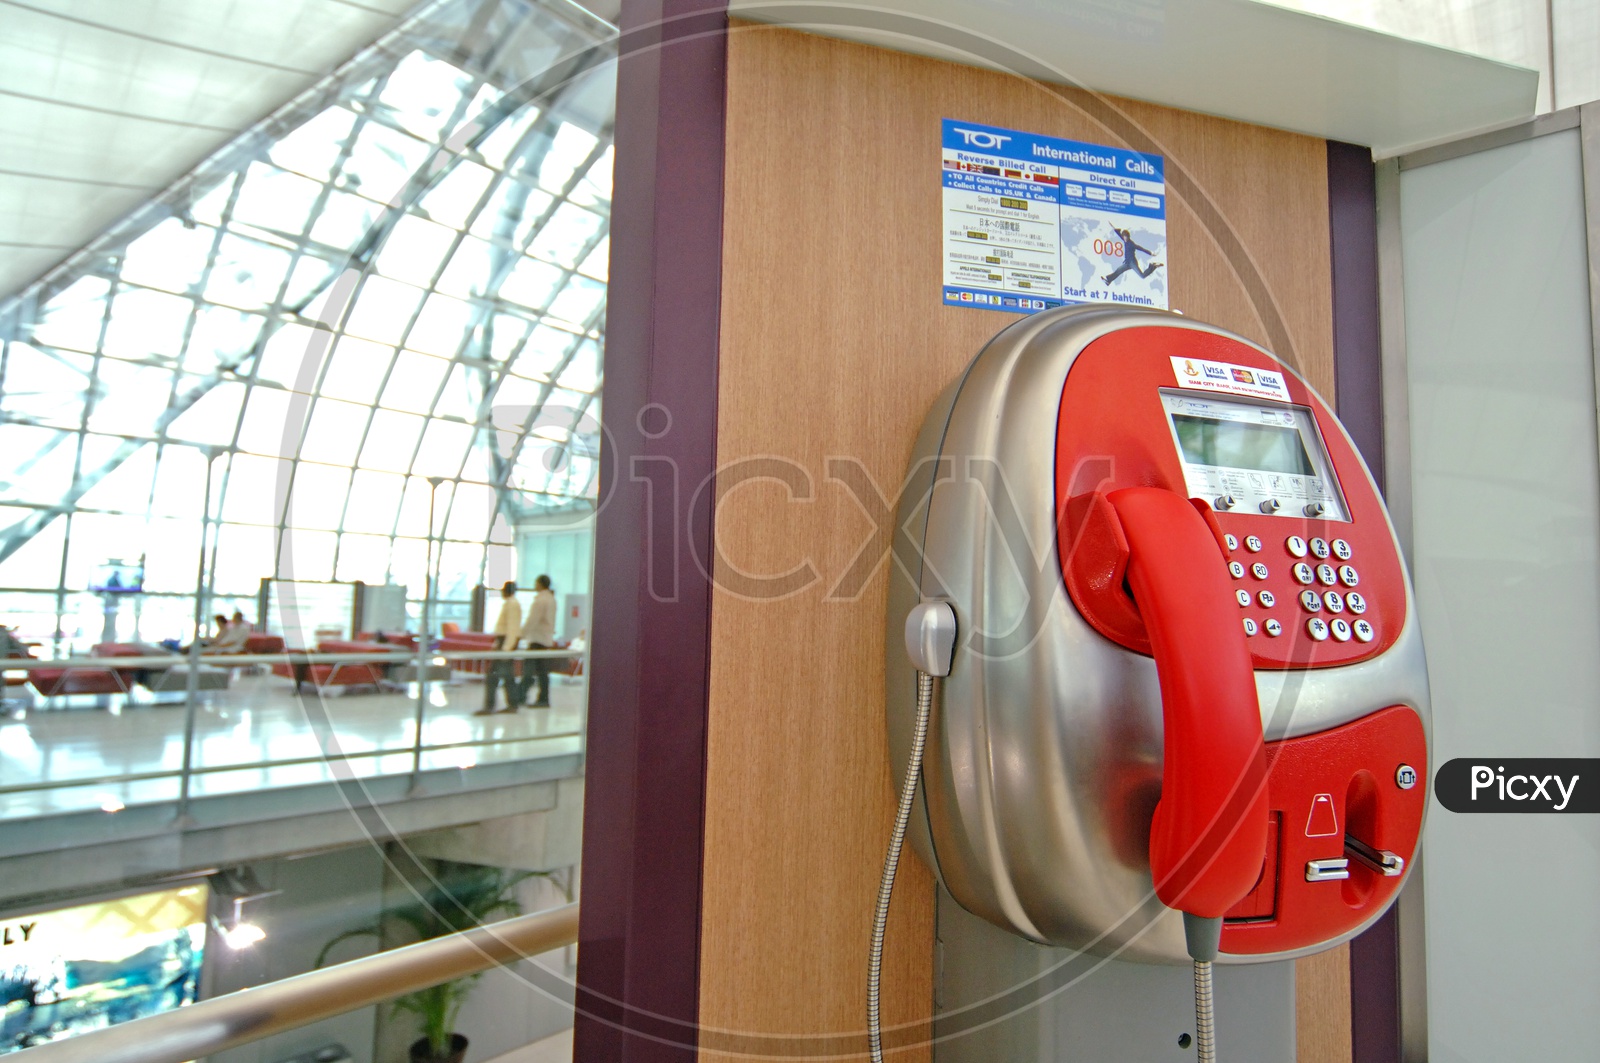 Telephone Booth With International Calling Facility In airport